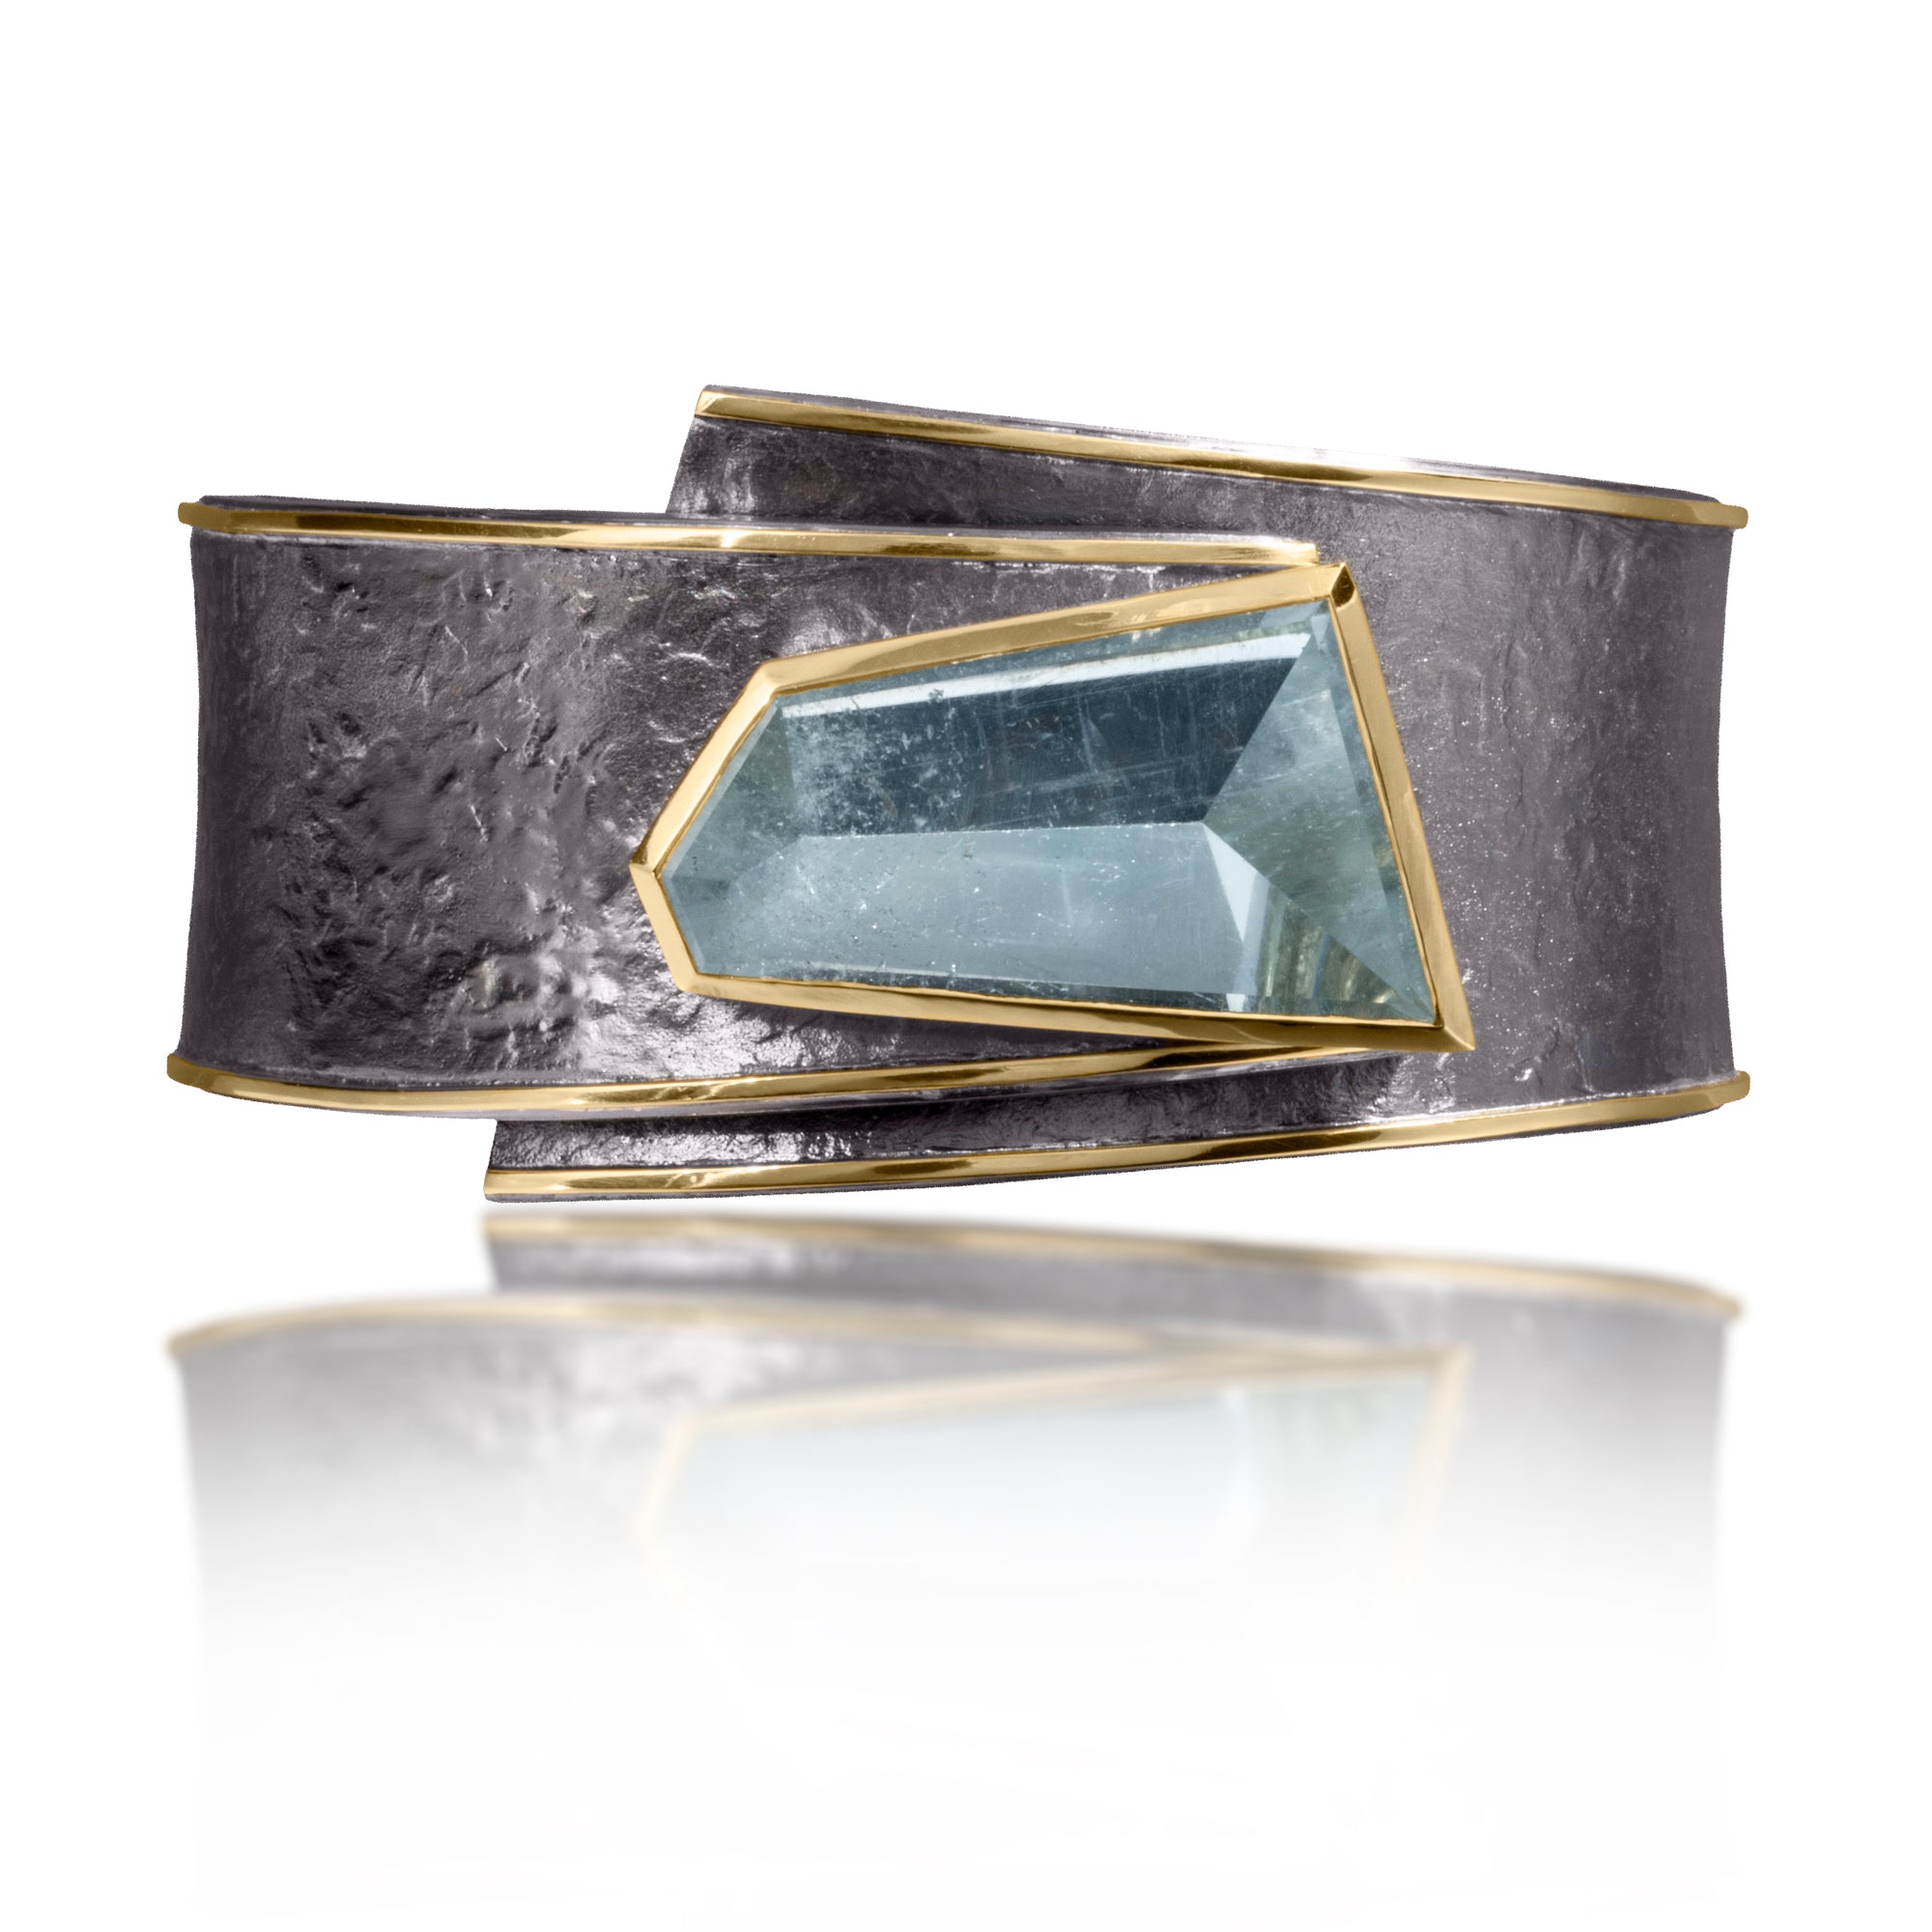 This one-of-a-kind Cyclone Cuff in 18k gold and oxidized silver isbezel set with a dramatic, mirror-cut Aquamarine, A hinge on the back side of this tapered cuff allows it to fully open, making it incredibly easy to put on and off with one hand. Wide, wrap-around style cuff, hand fabricated, spring steel hinge, hammer textured.